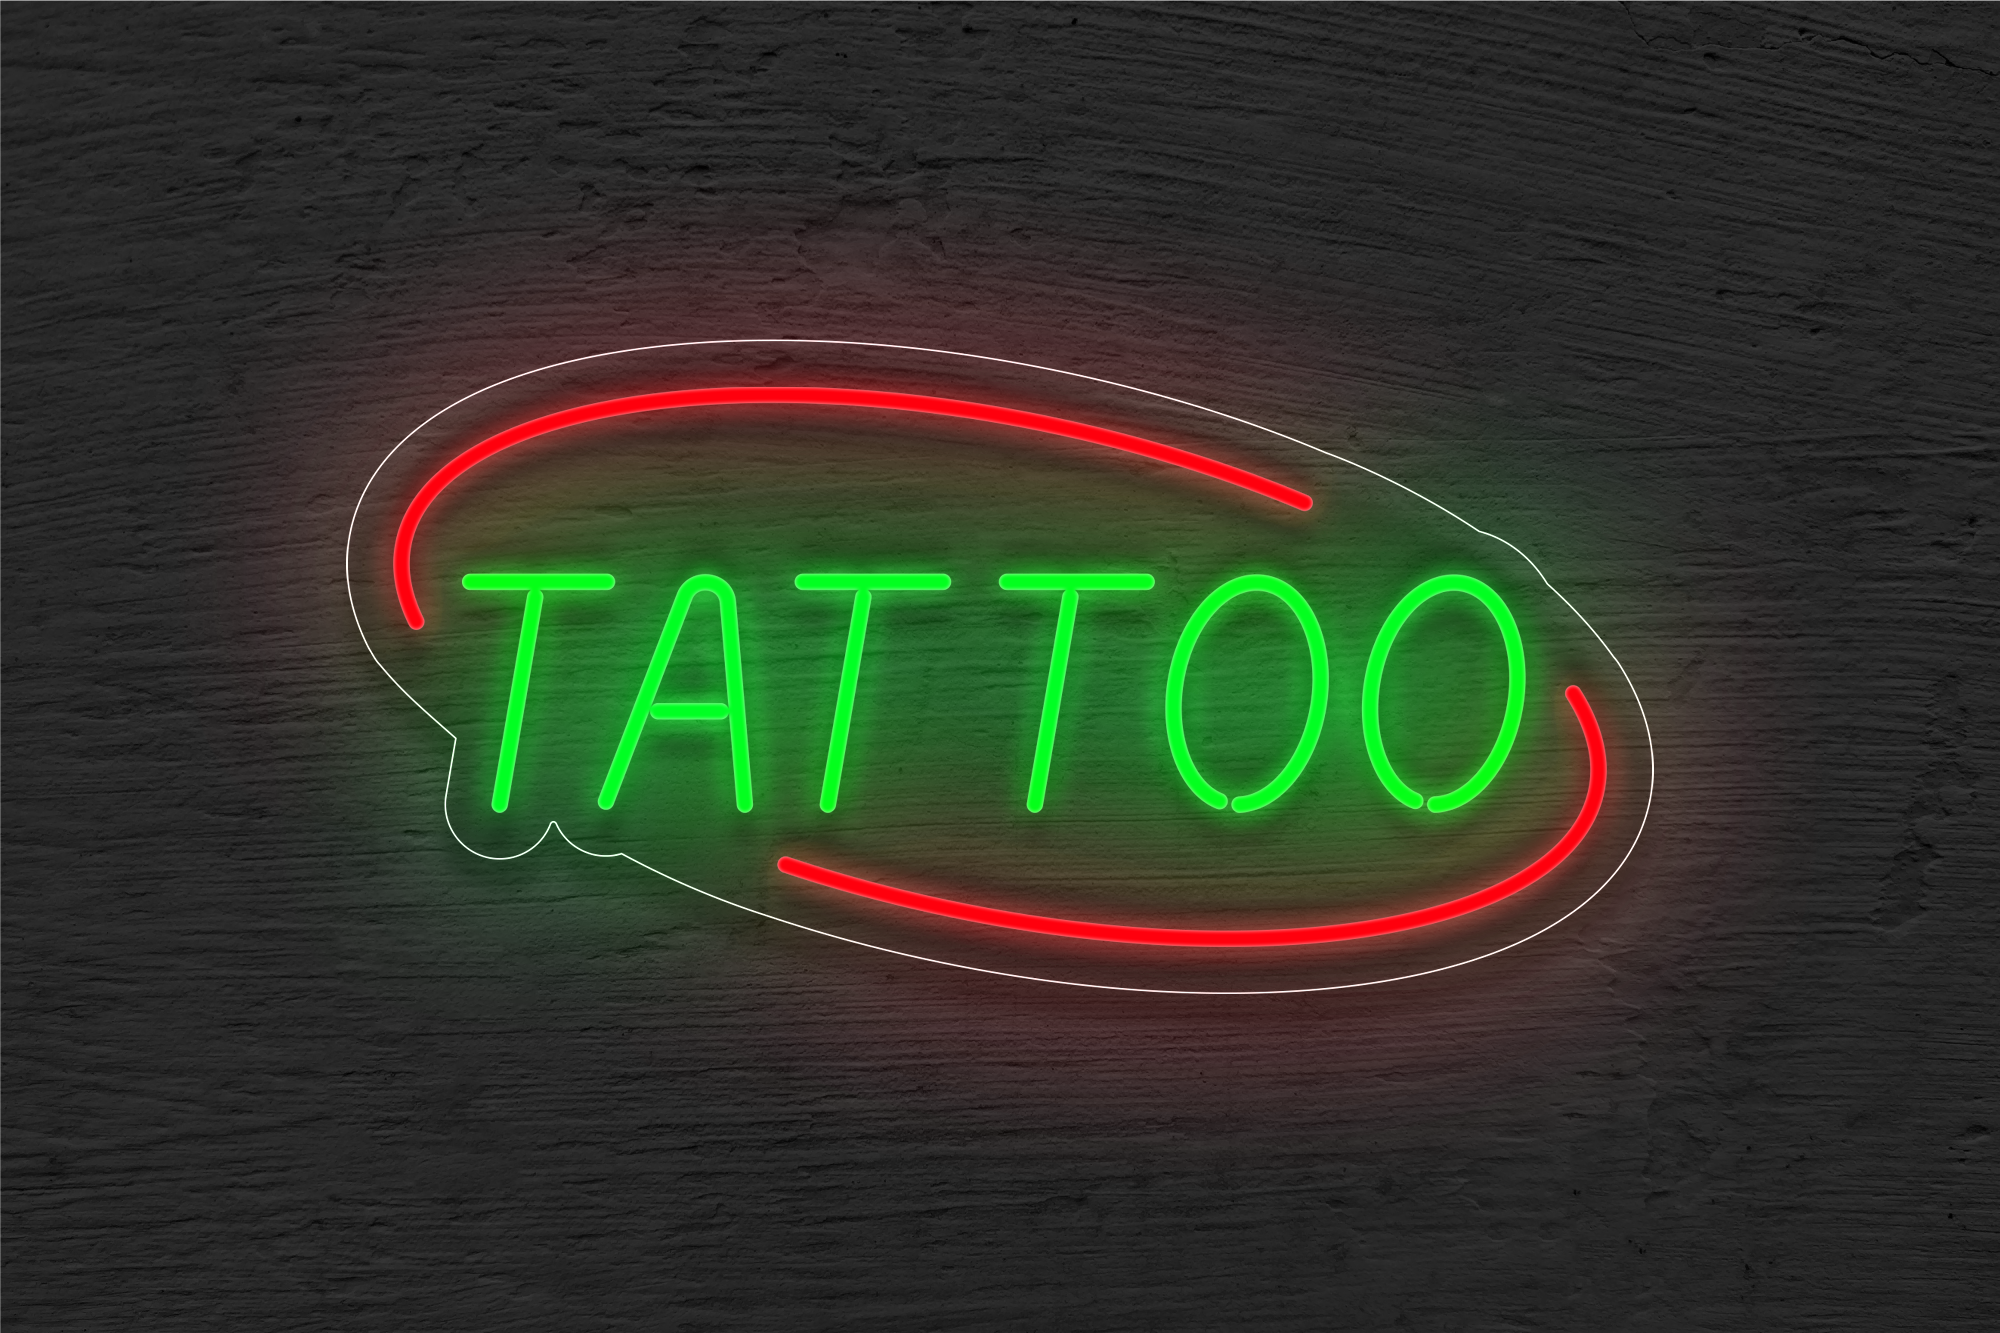 "Tattoo" with Arc Border LED Neon Sign